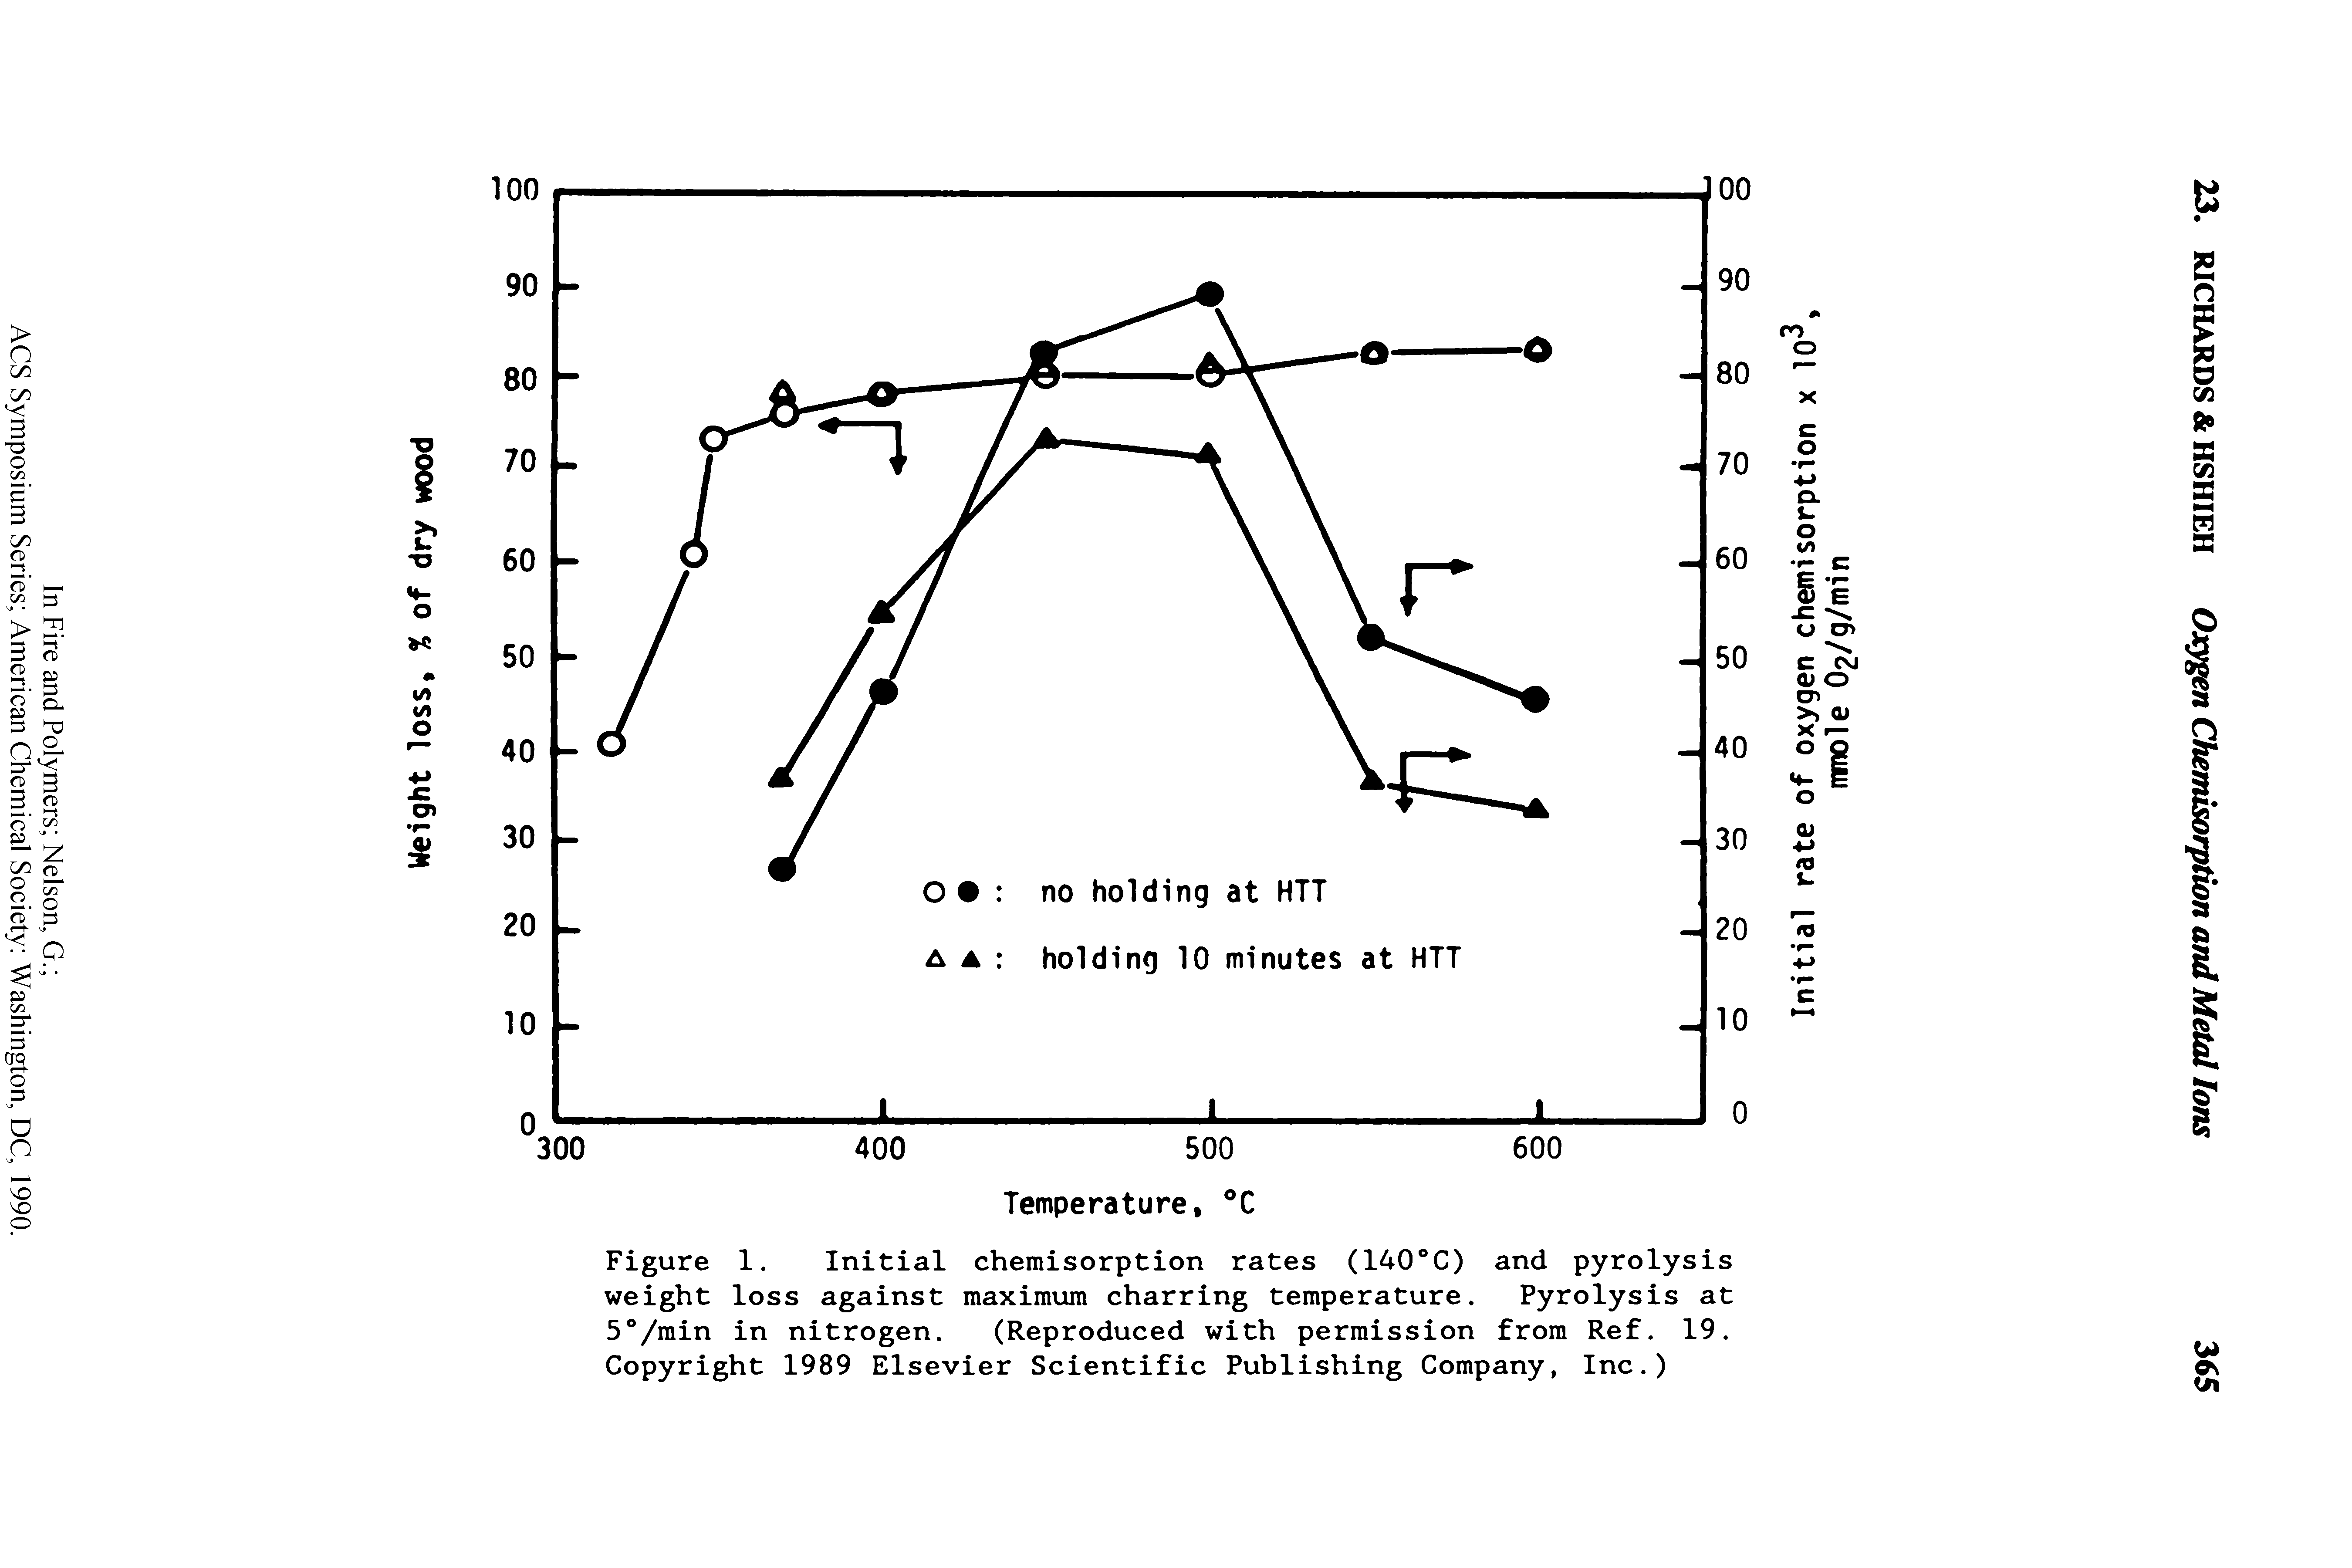 Figure 1. Initial chemisorption rates (140°C) and pyrolysis weight loss against maximum charring temperature. Pyrolysis at 5°/min in nitrogen. (Reproduced with permission from Ref. 19. Copyright 1989 Elsevier Scientific Publishing Company, Inc.)...